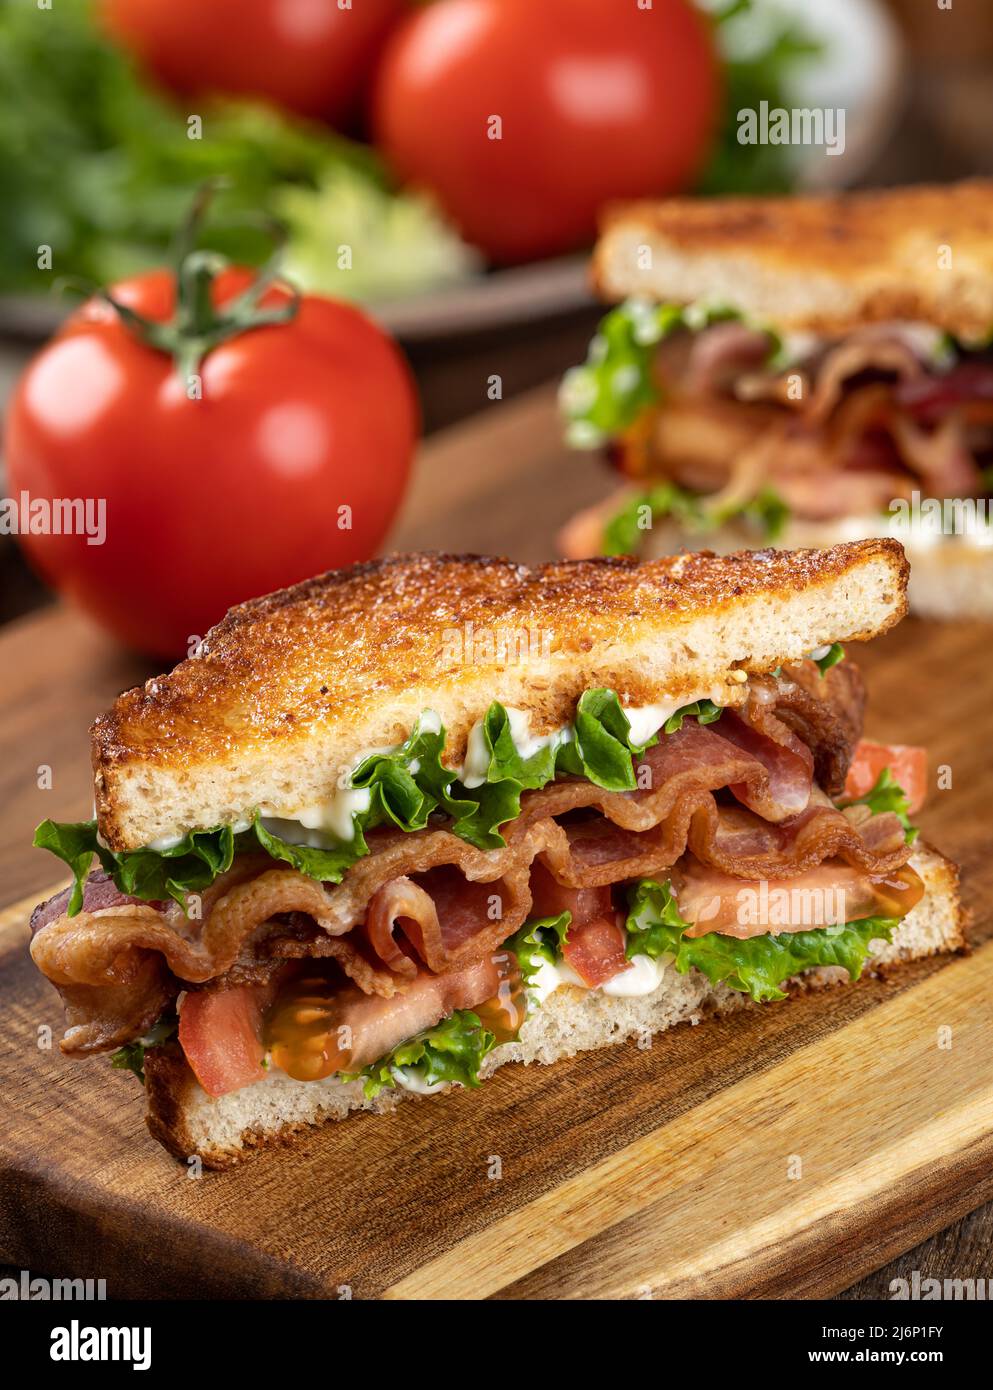 Blt sandwich made with bacon, lettuce and tomato on toasted whole grain bread cut in half on a wooden cutting board Stock Photo